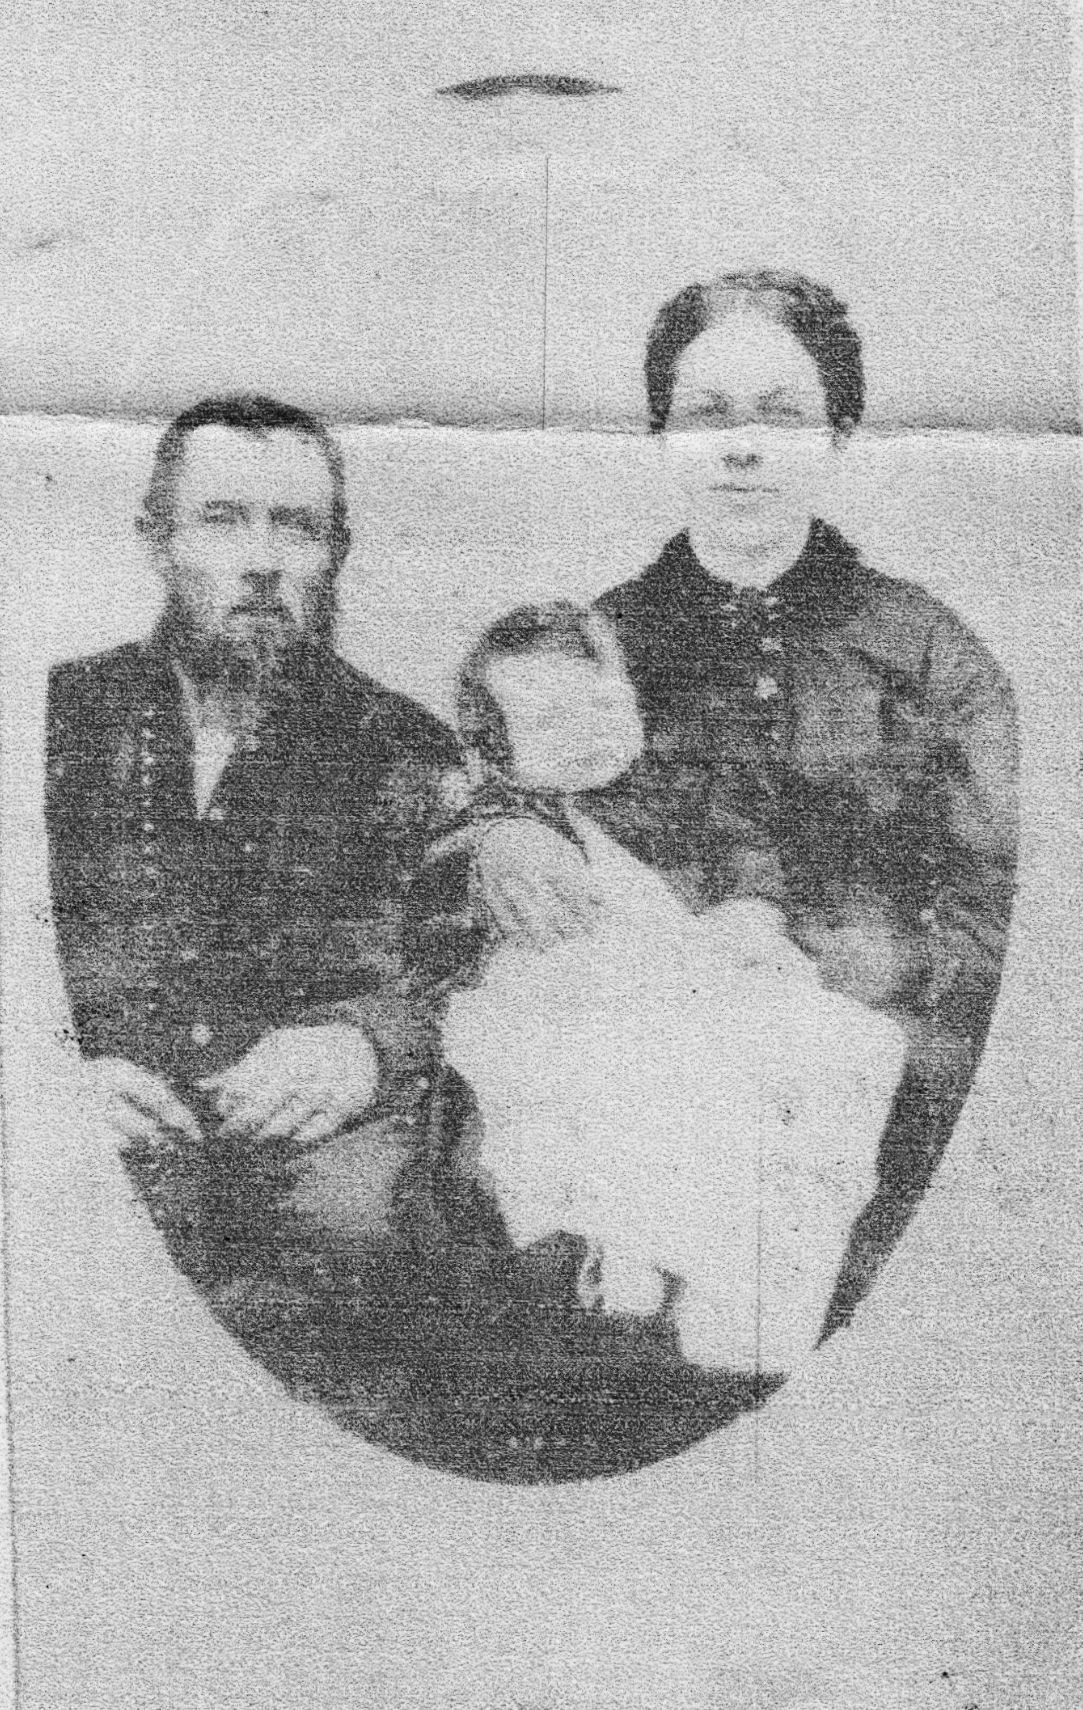 As an infant, with her parents. (Source: Find A Grave)